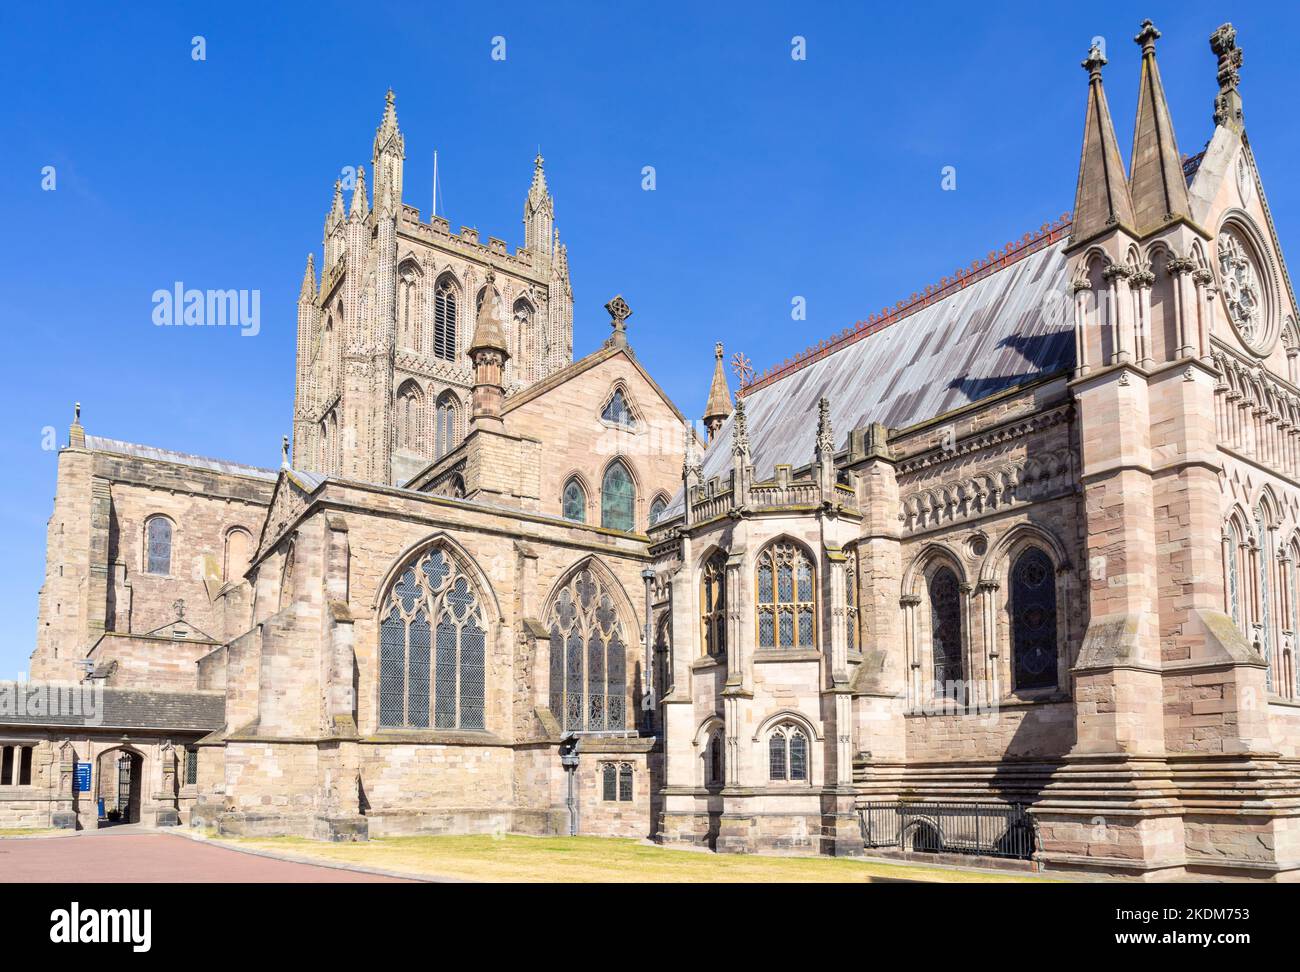 Hereford Cathedral Hereford Herefordshire England GB Europa Stockfoto